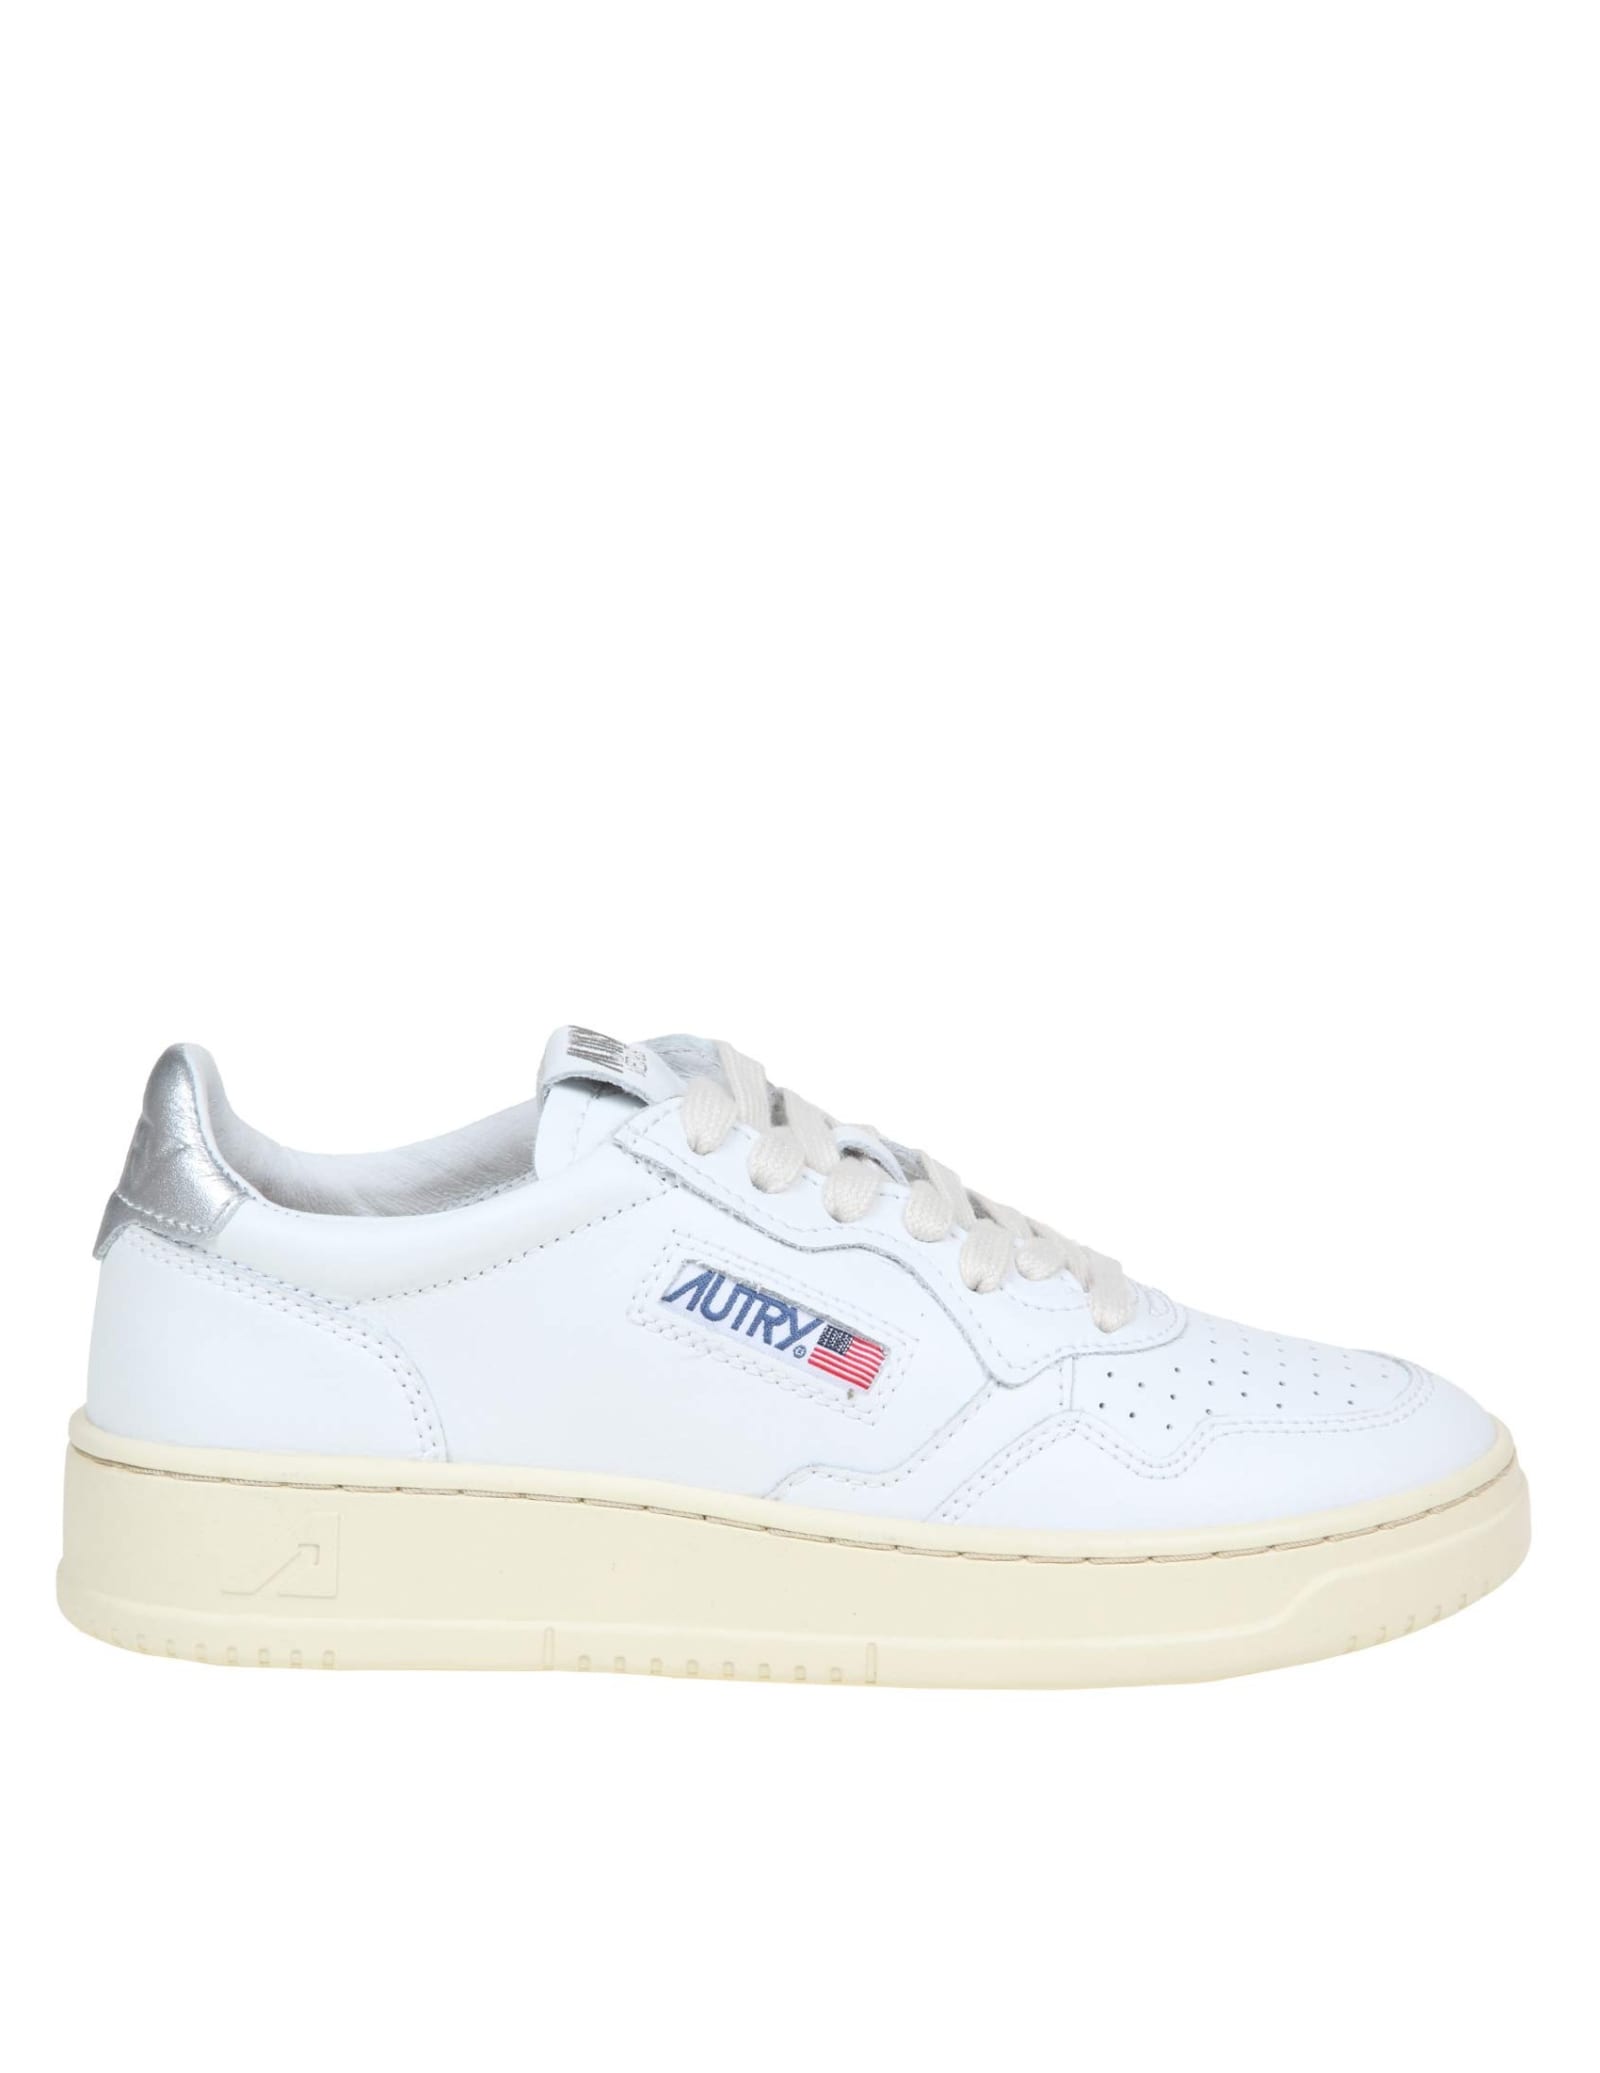 AUTRY SNEAKERS IN WHITE LEATHER